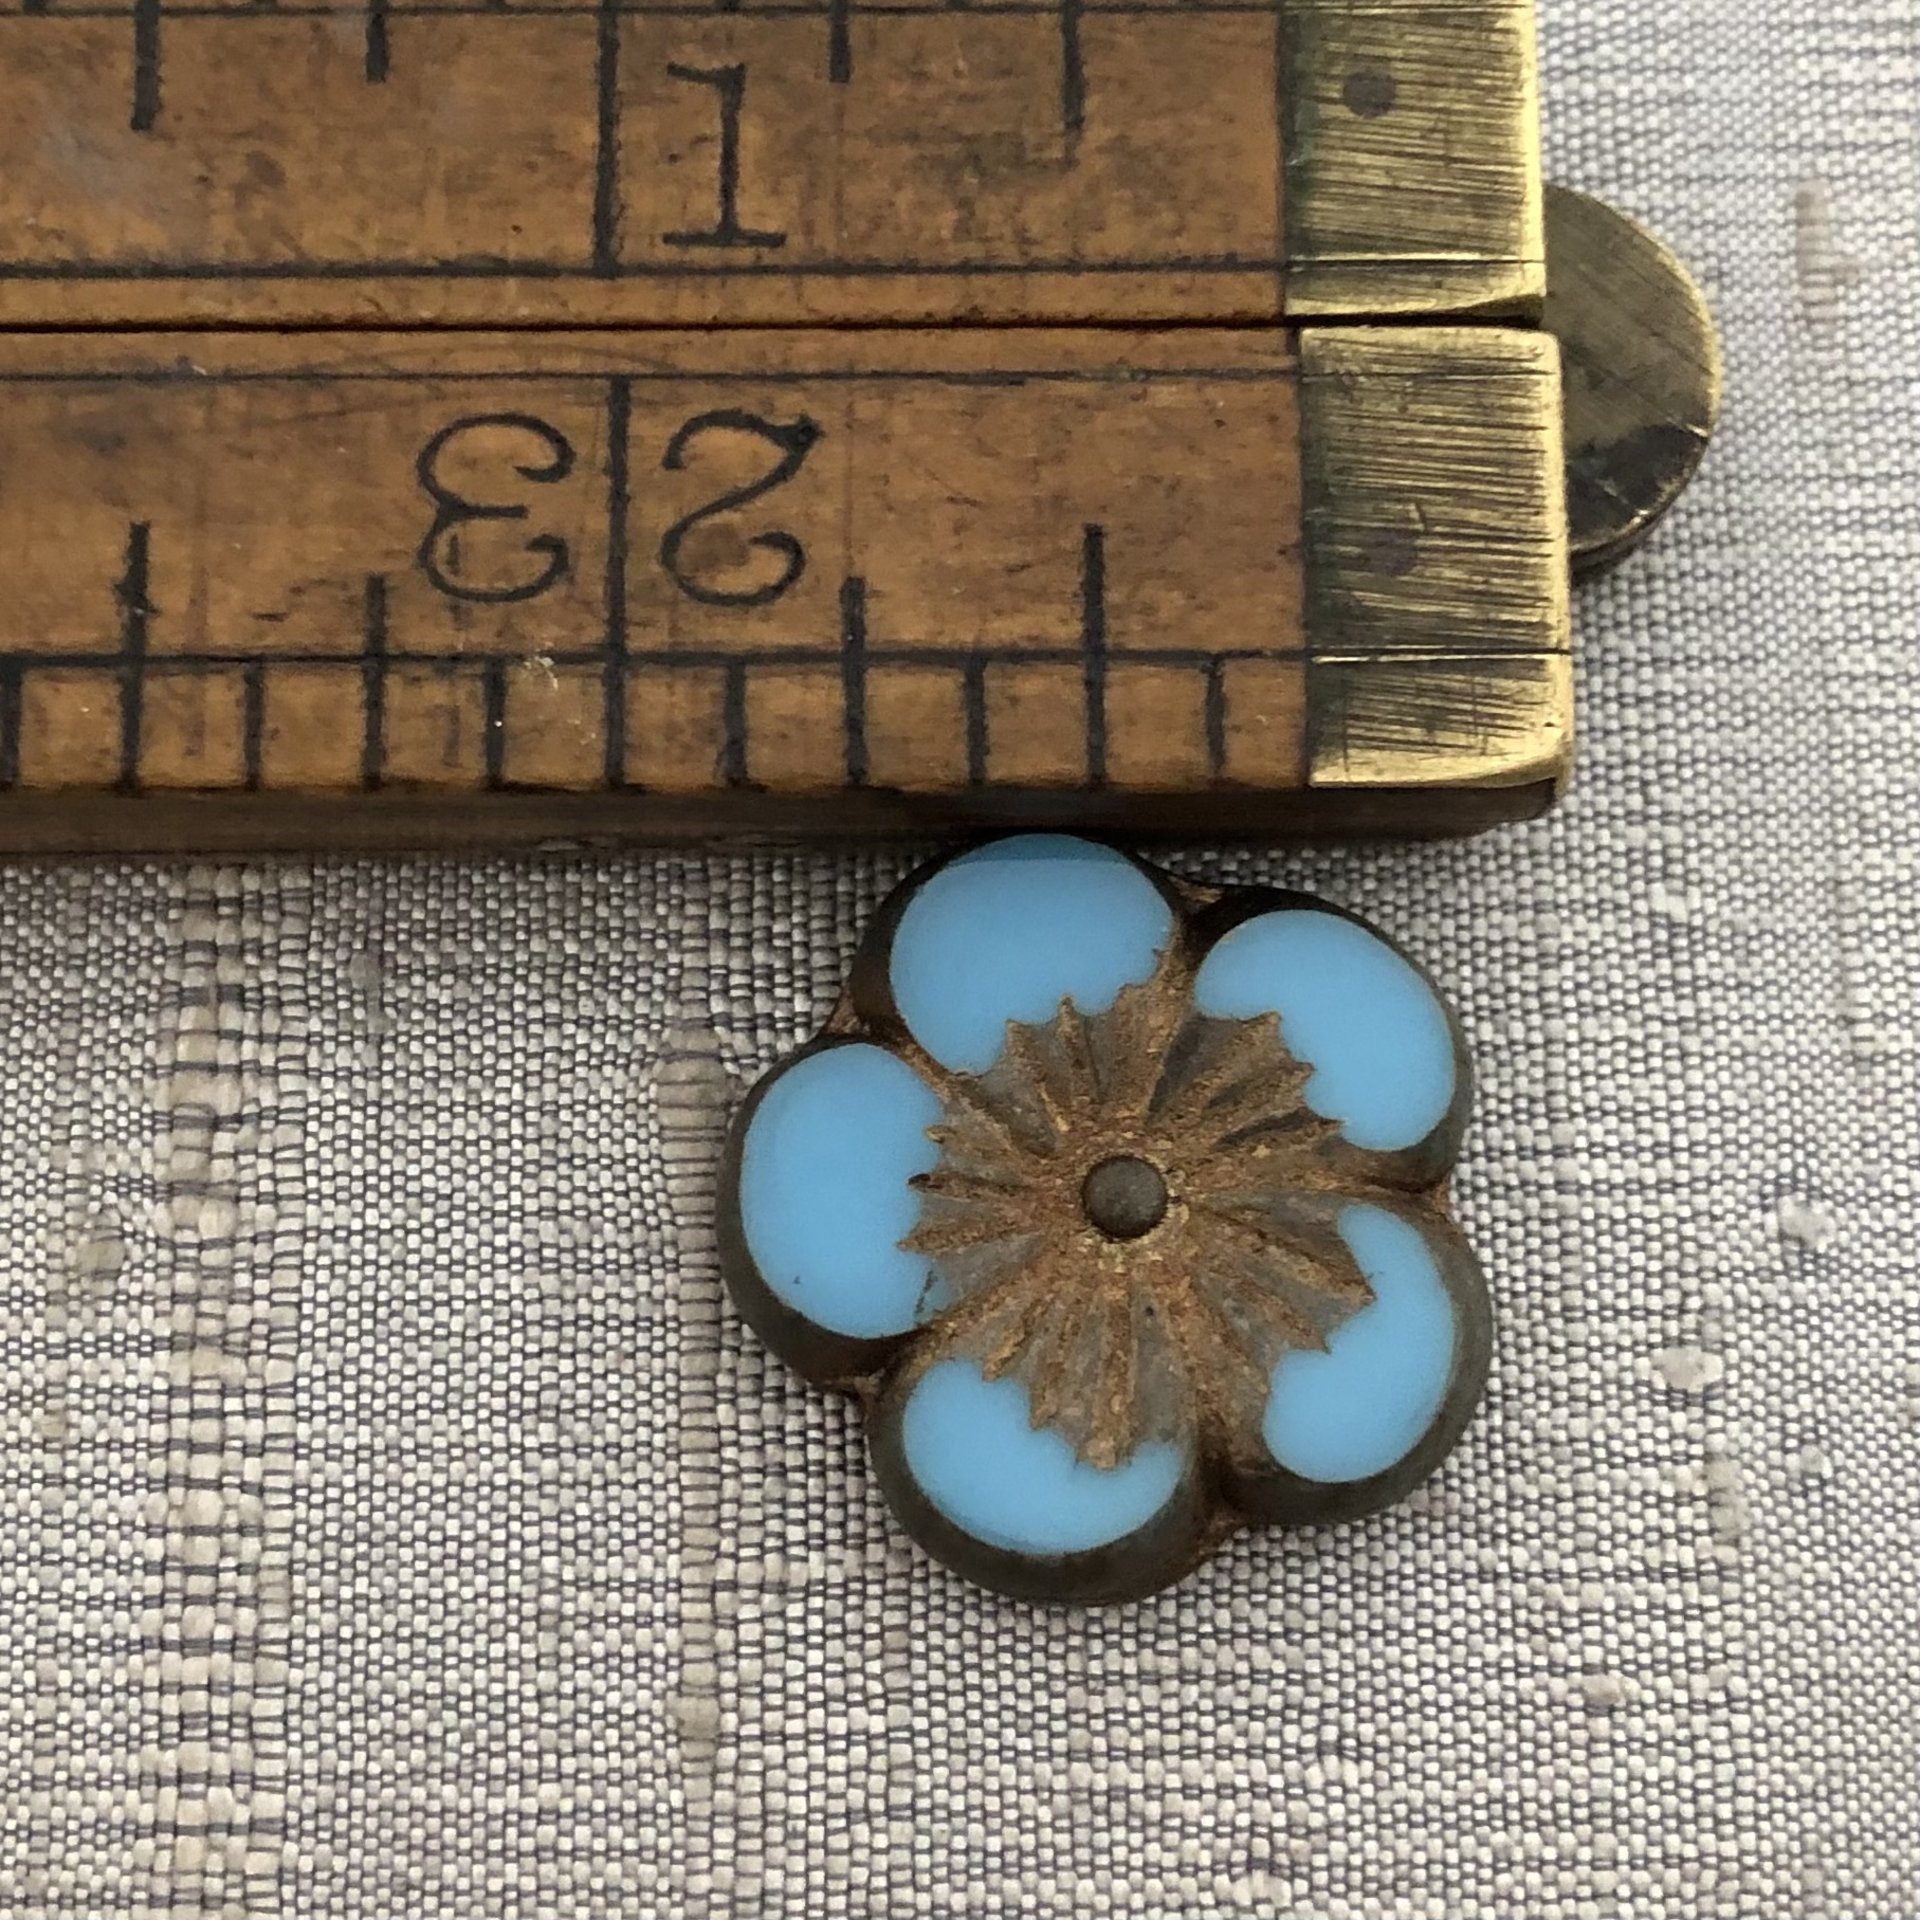 22mm Hibiscus Flower Medium Sky Blue with Gold Wash and Metallic Picasso Finish - 1 Bead